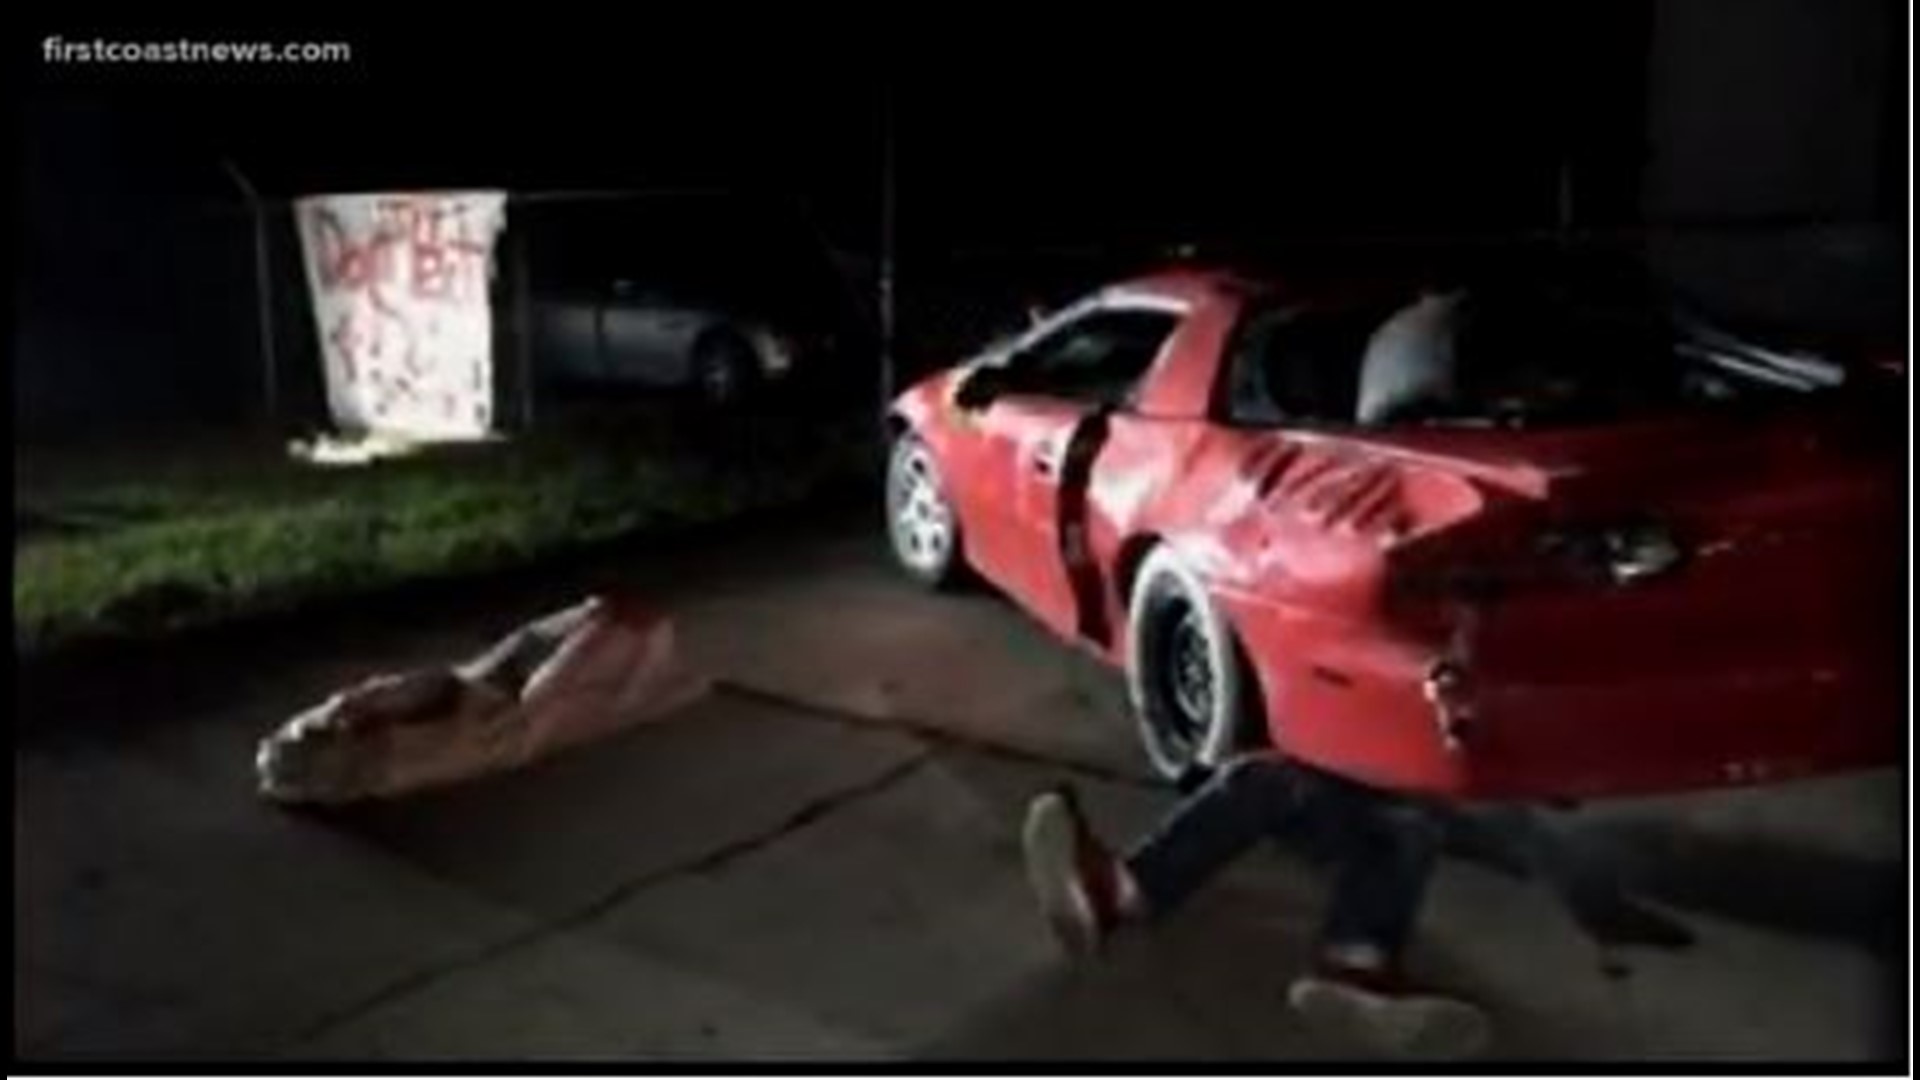 A St. Johns County man decided to use a smashed car and mannequins to send a gruesome message about texting in driving.